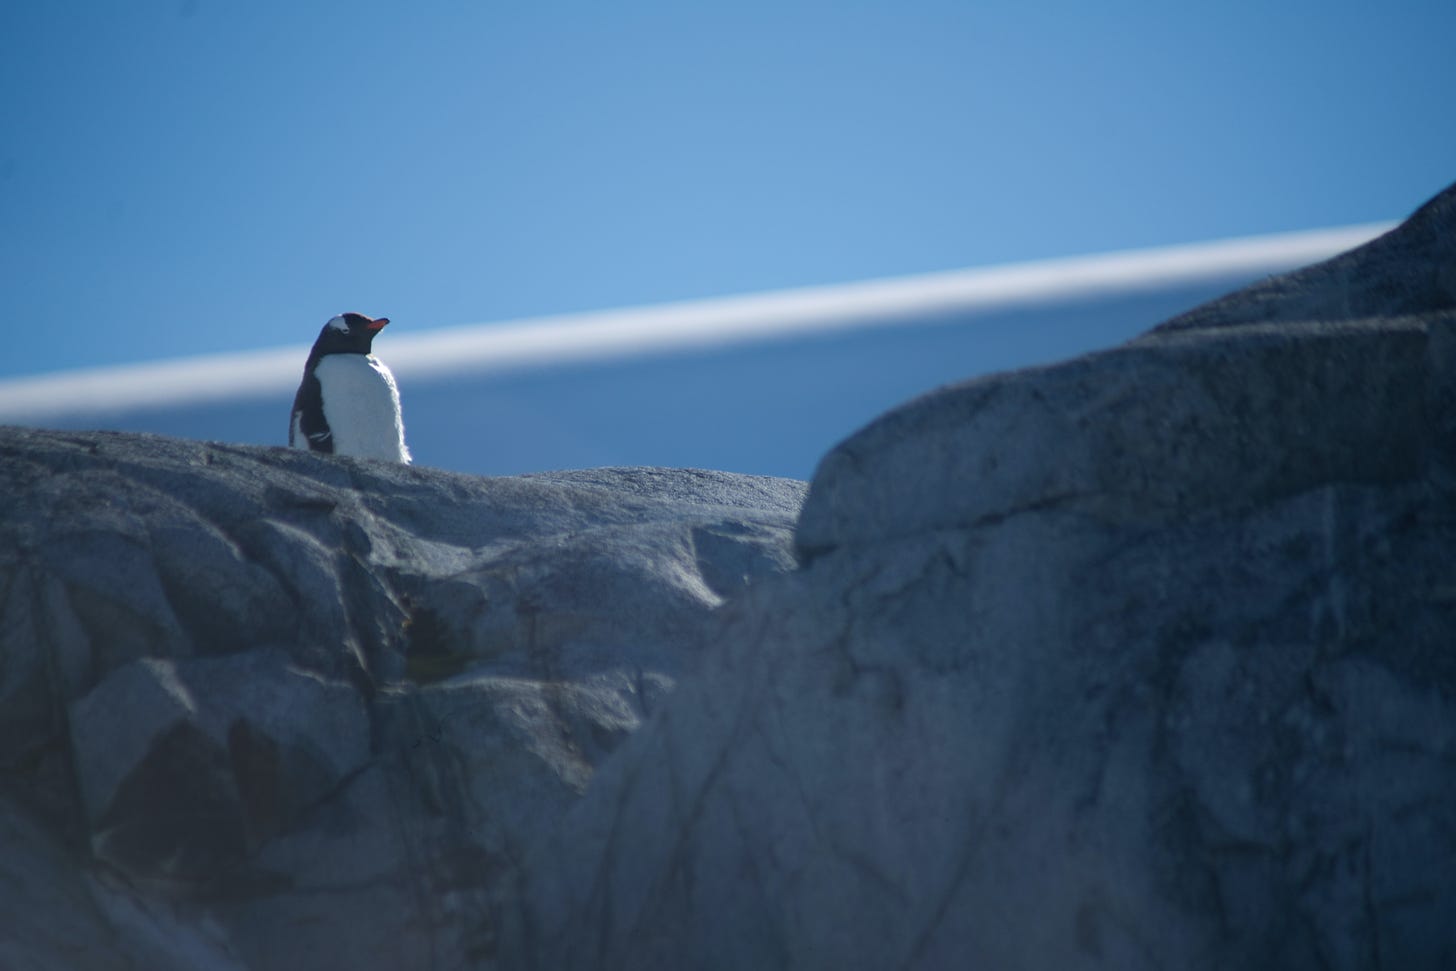 A sagacious-looking penguin, viewed from below, gazes off meaningfully into the cloudless blue sky.